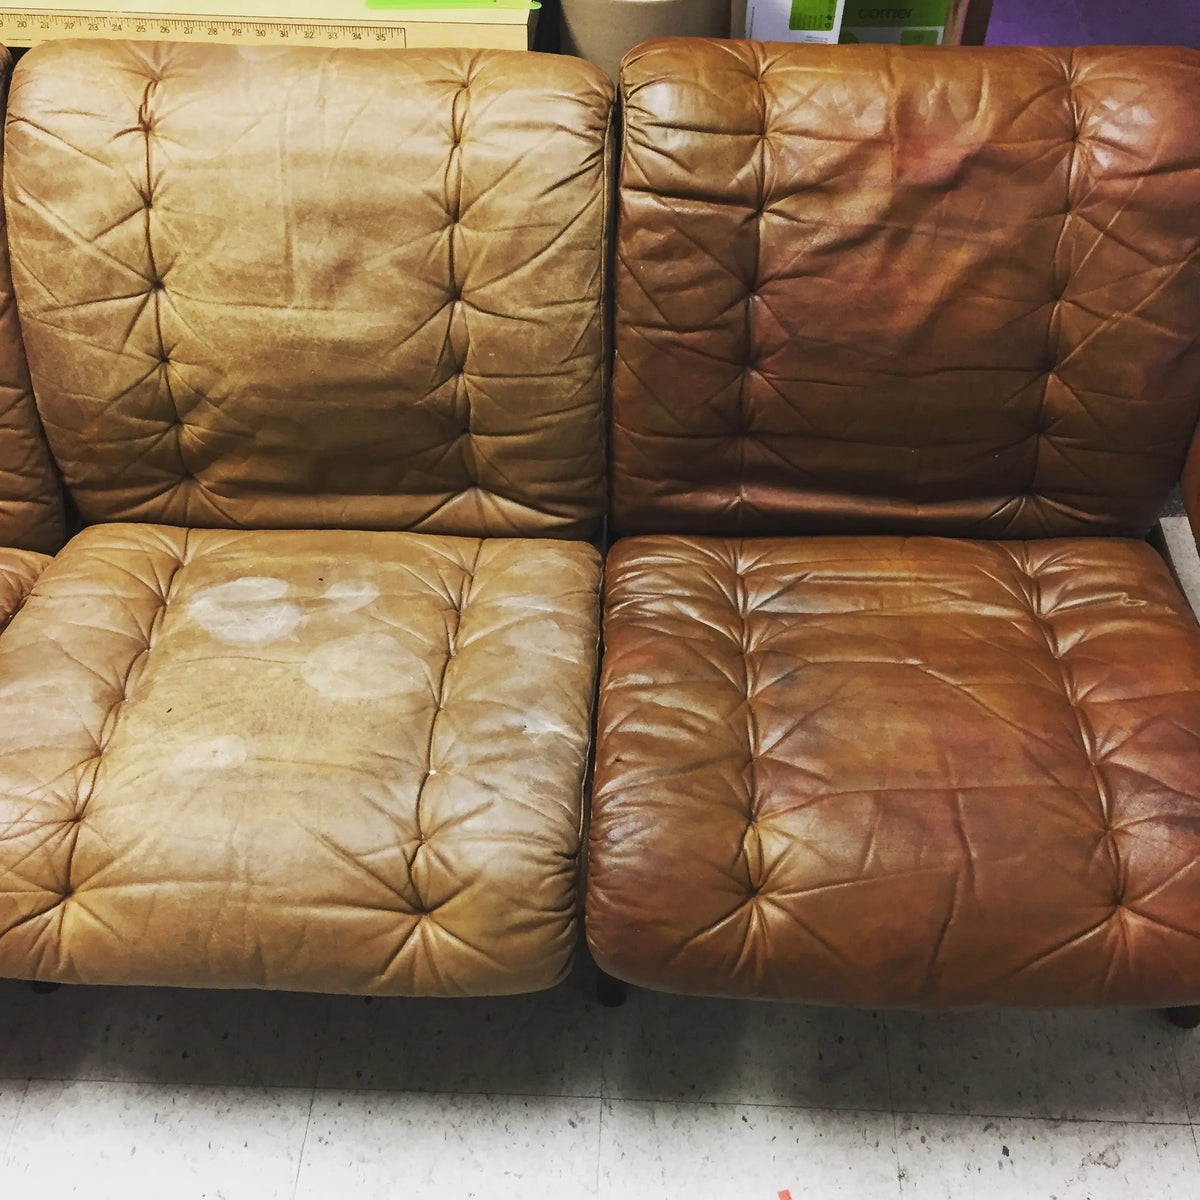 How To: Leather Couch Restoration - Hart & Hive